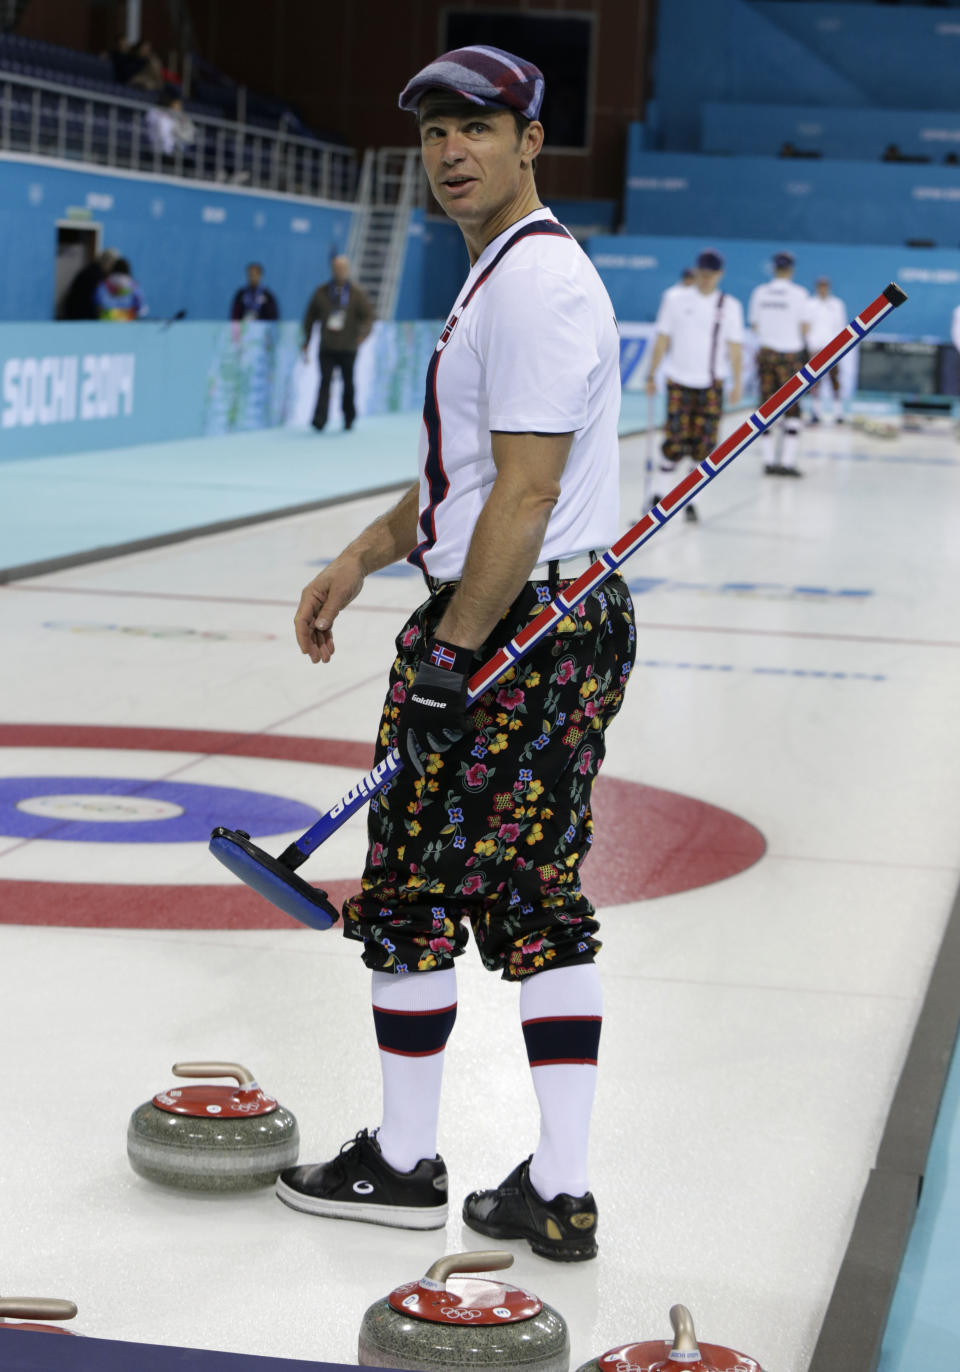 Norway skip Thomas Ulsrud wears rose-painting knickers and a patterned flat cap at curling training at the 2014 Winter Olympics, Saturday, Feb. 8, 2014, in Sochi, Russia. (AP Photo/Robert F. Bukaty)